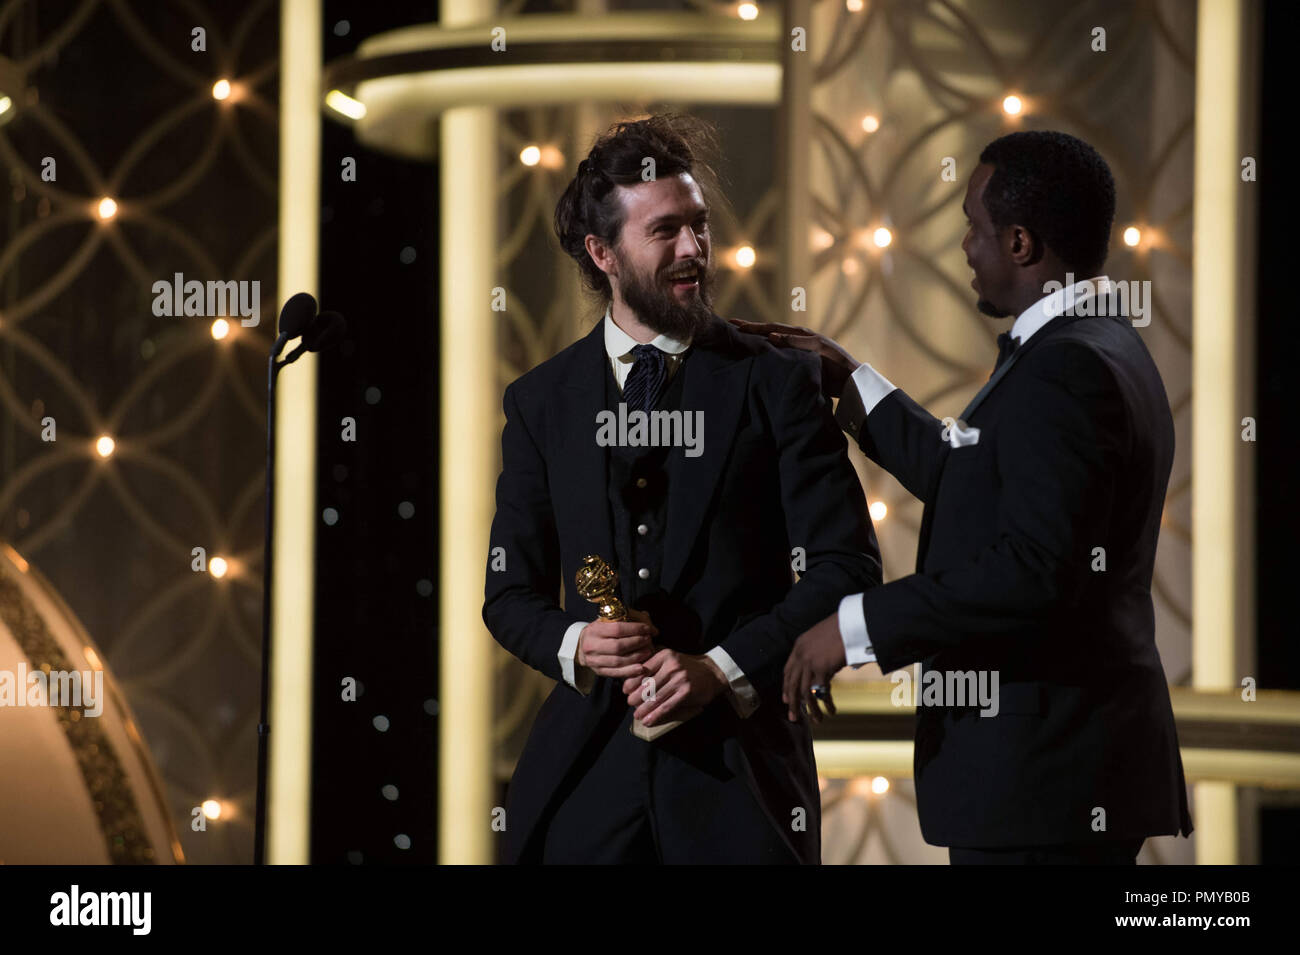 The Golden Globe is awarded to Alex Ebert for BEST ORIGINAL SCORE – MOTION PICTURE for “ALL IS LOST” from Sean Combs at the 71st Annual Golden Globe Awards at the Beverly Hilton in Beverly Hills, CA on Sunday, January 12, 2014.  File Reference # 32222 506JRC  For Editorial Use Only -  All Rights Reserved Stock Photo